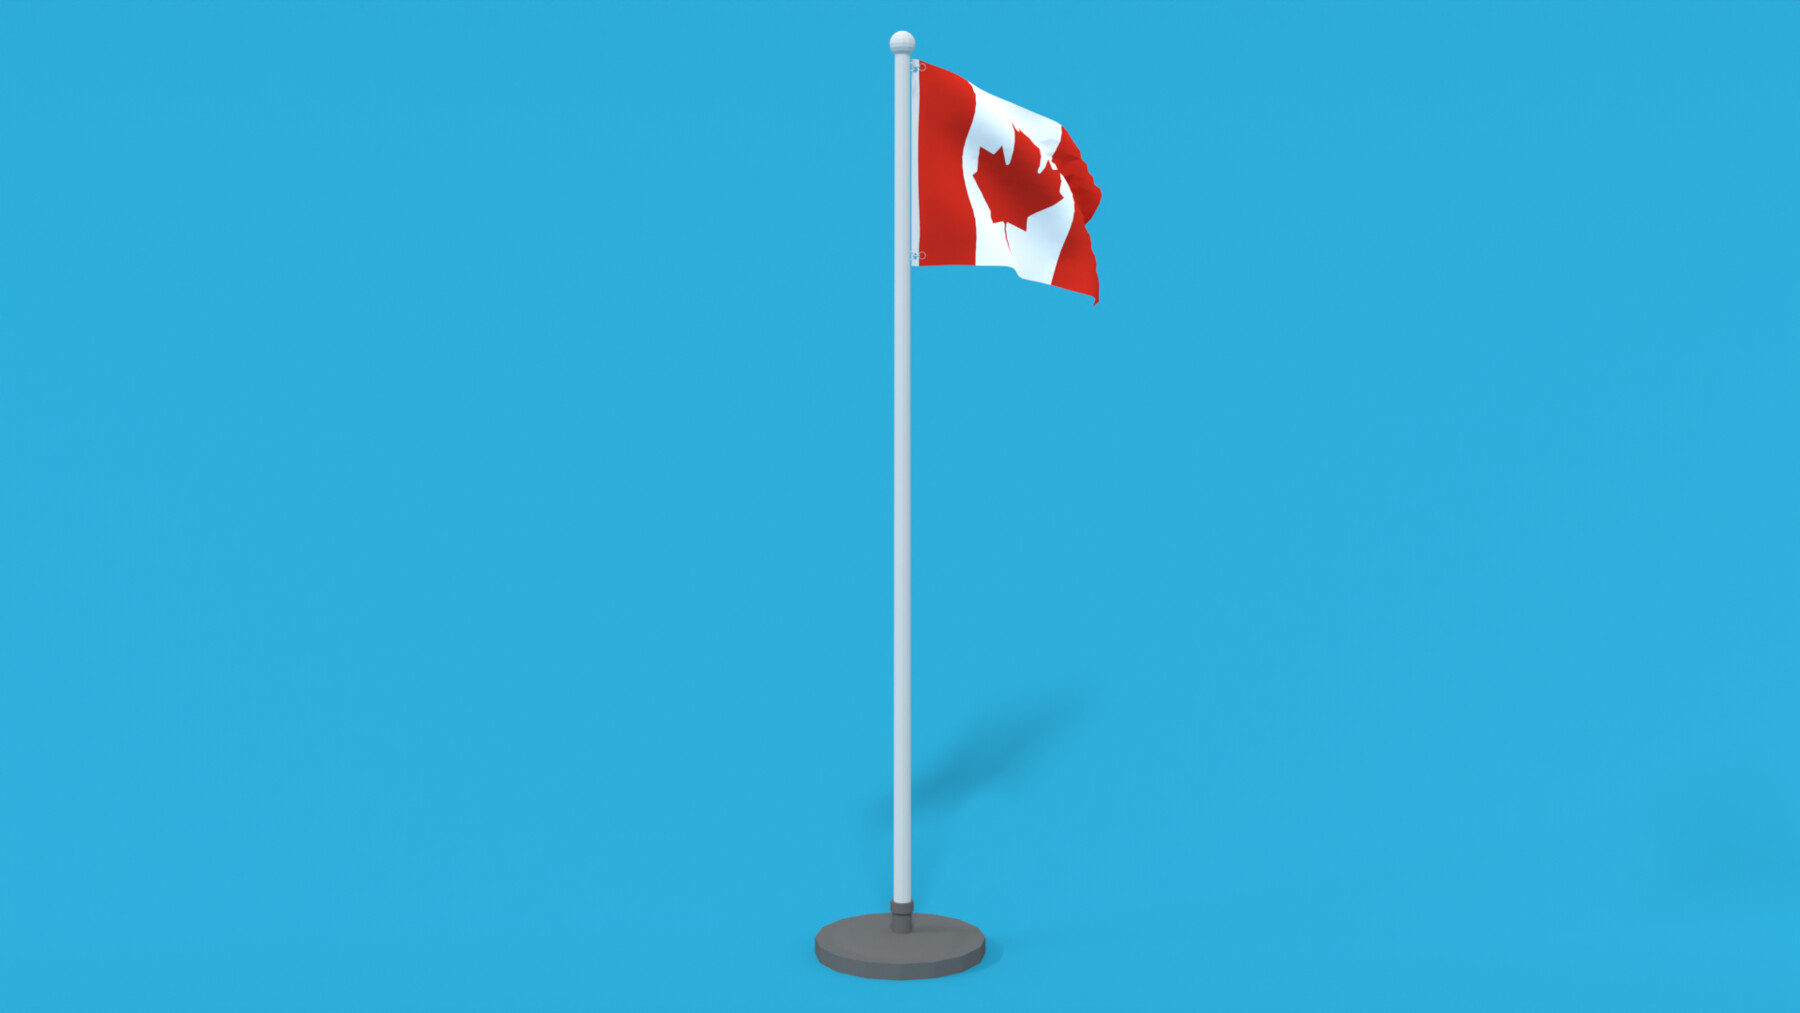 ArtStation - Low Poly Seamless Animated Canada Flag | Game Assets